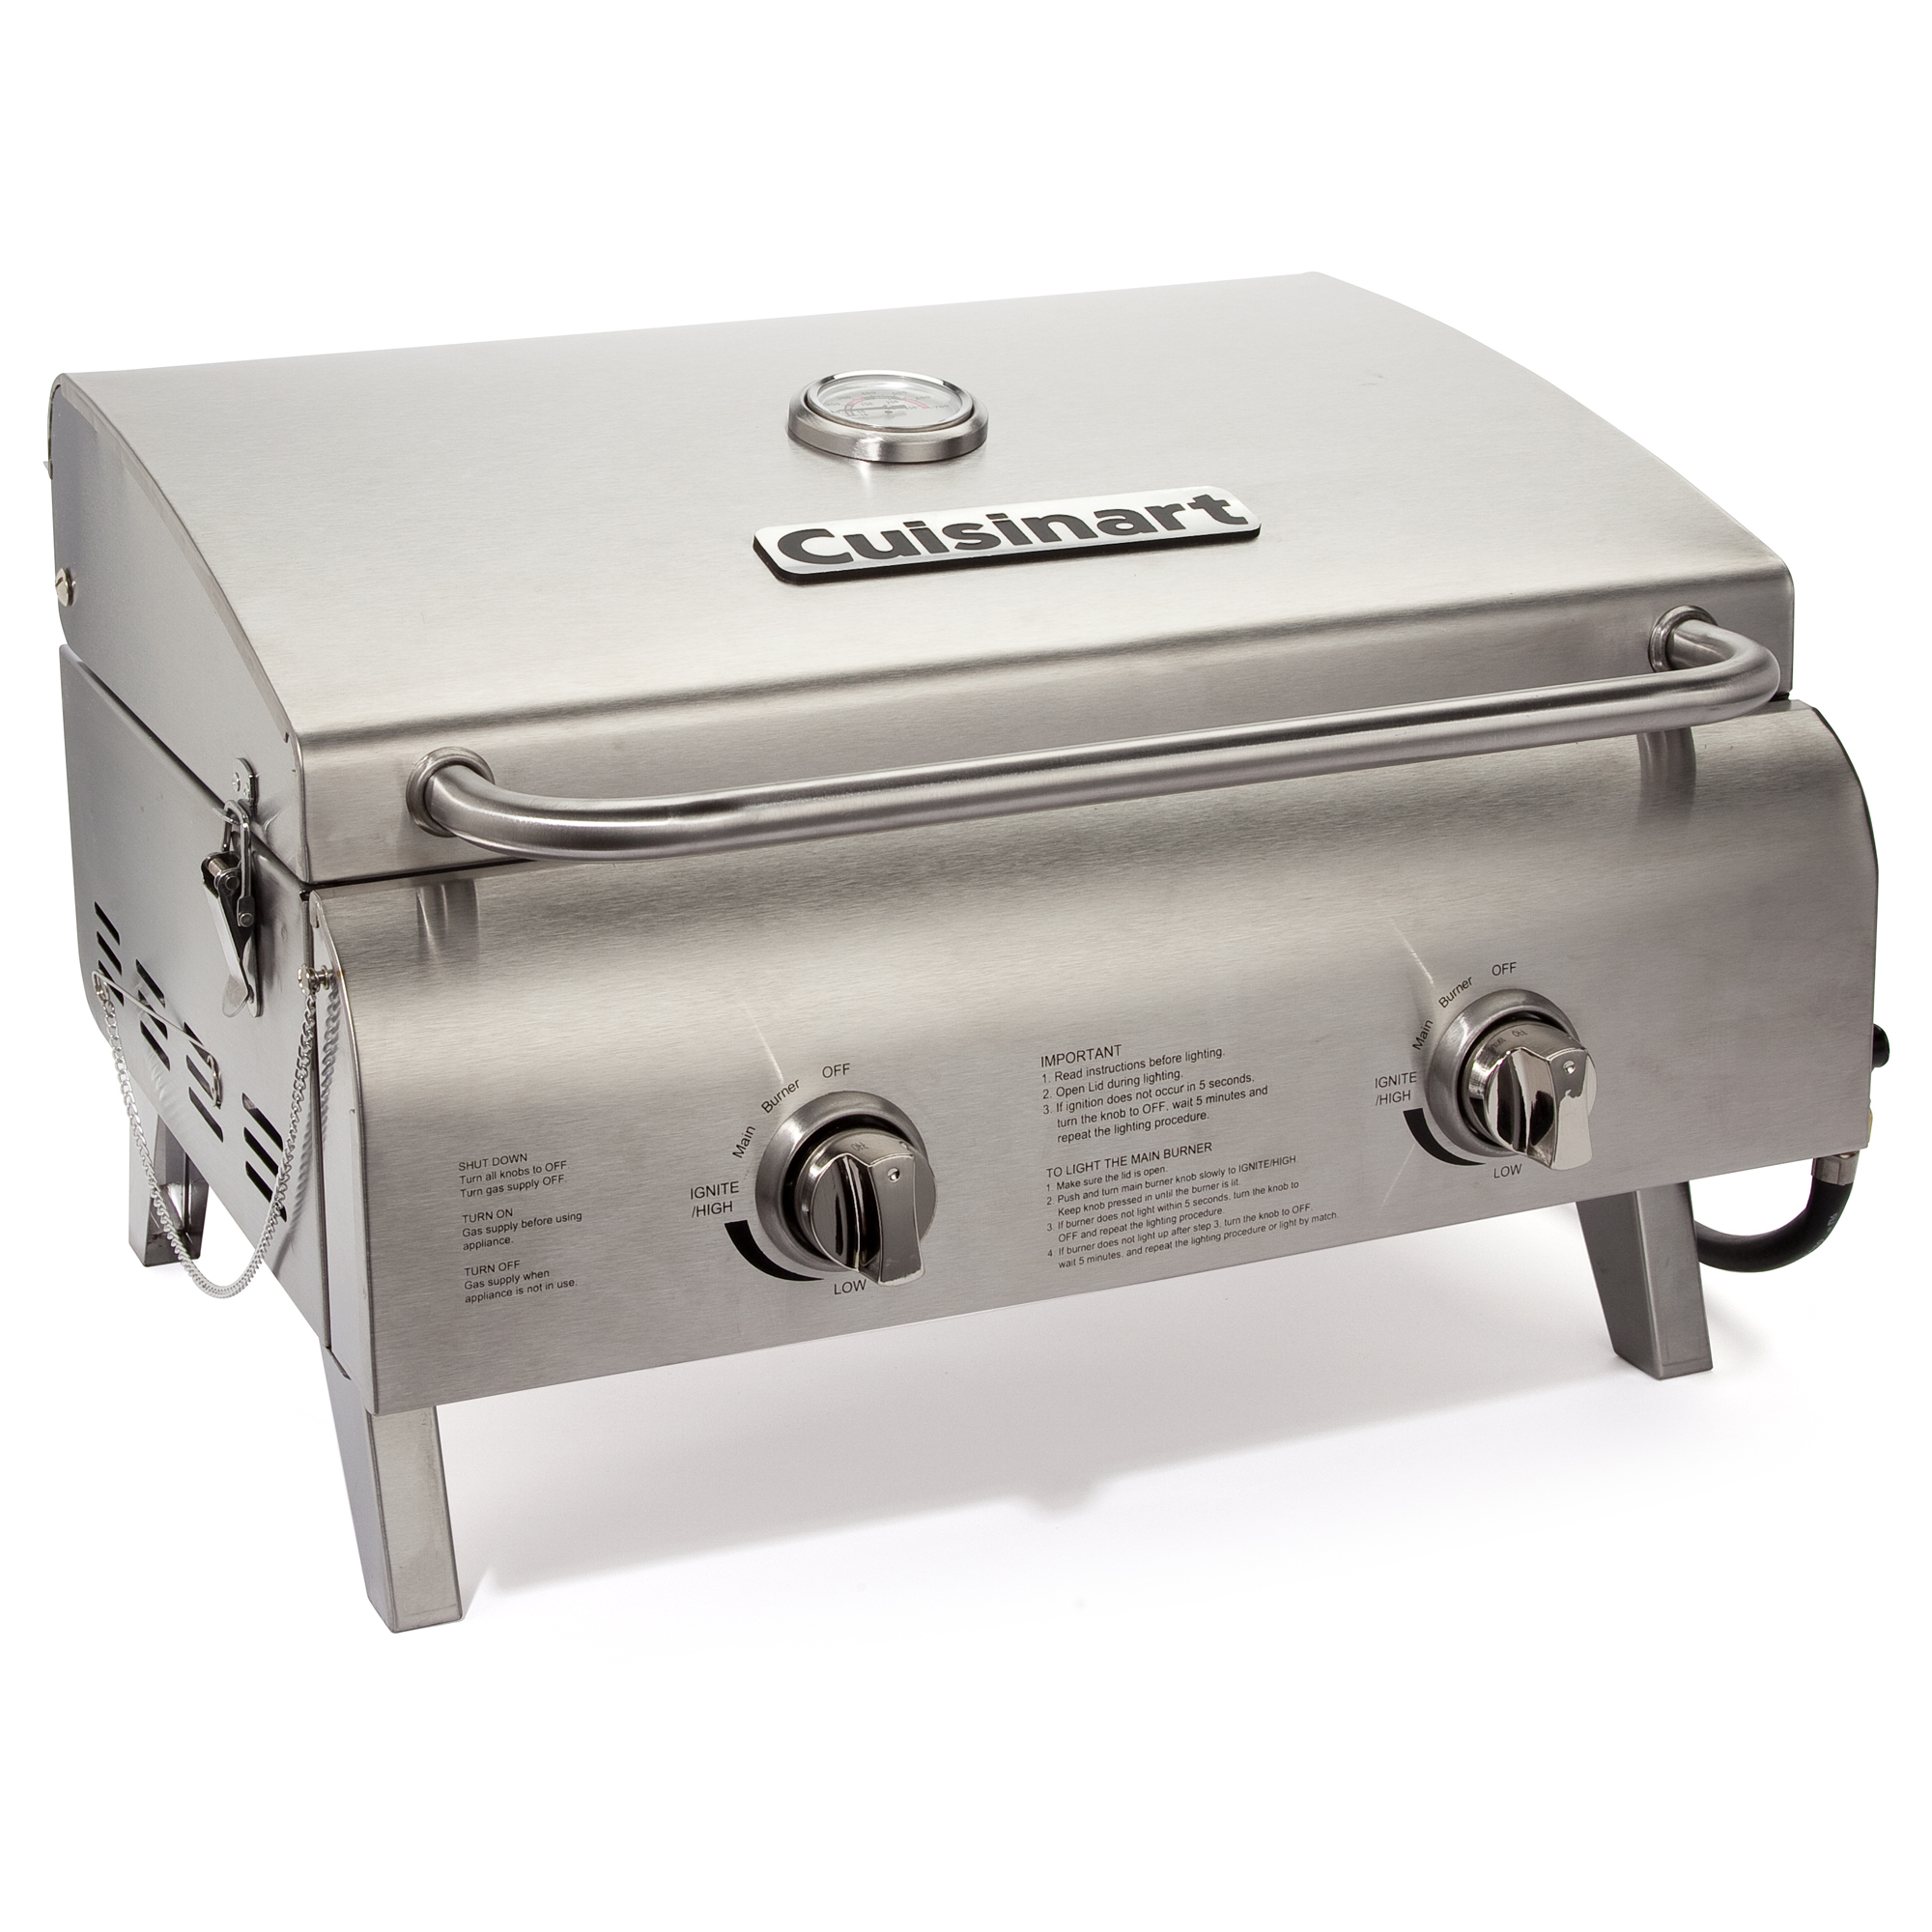 Cuisinart CGG-306 Chef's Style Stainless 2 Burner Tabletop Gas Grill, Silver - image 1 of 17